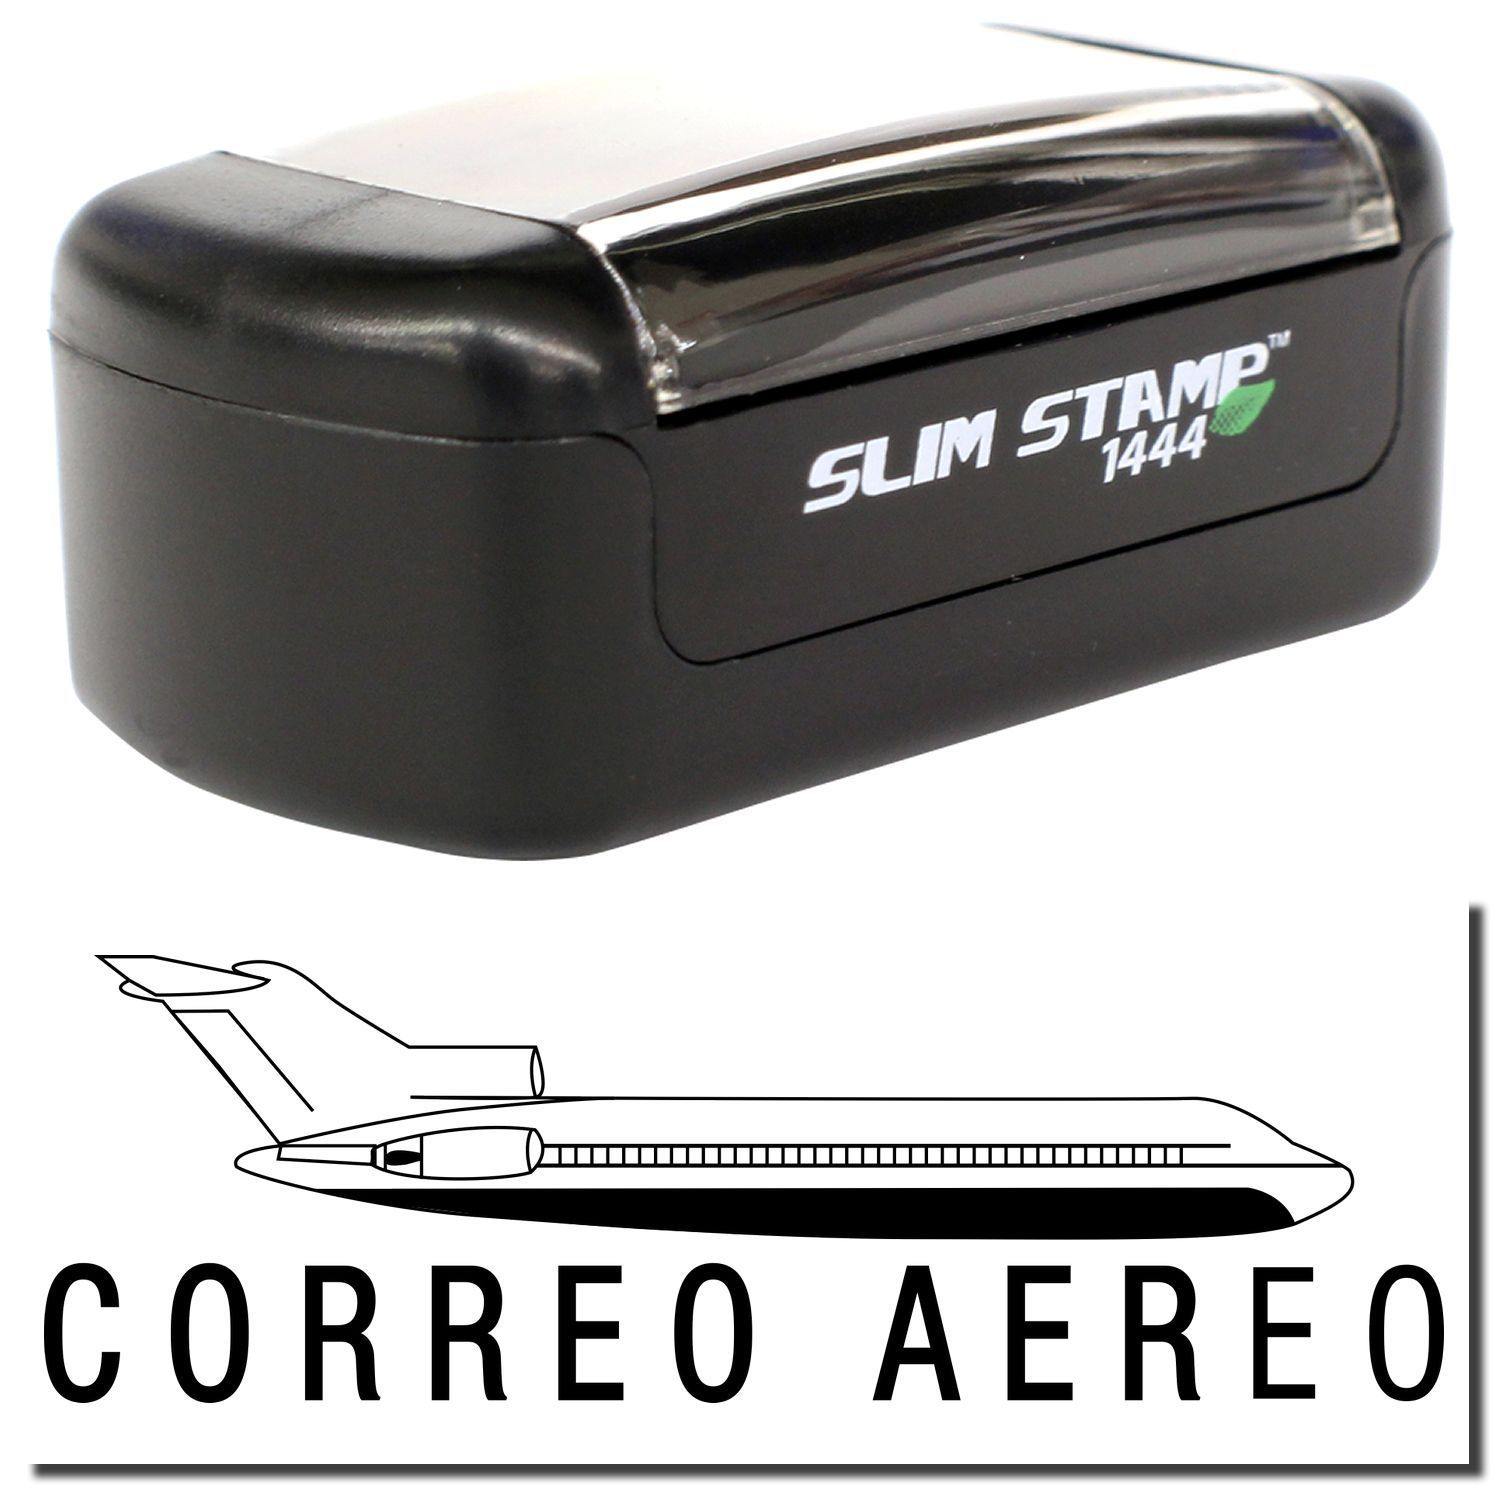 A stock office pre-inked stamp with a stamped image showing how the text "CORREO AEREO" is displayed after stamping.